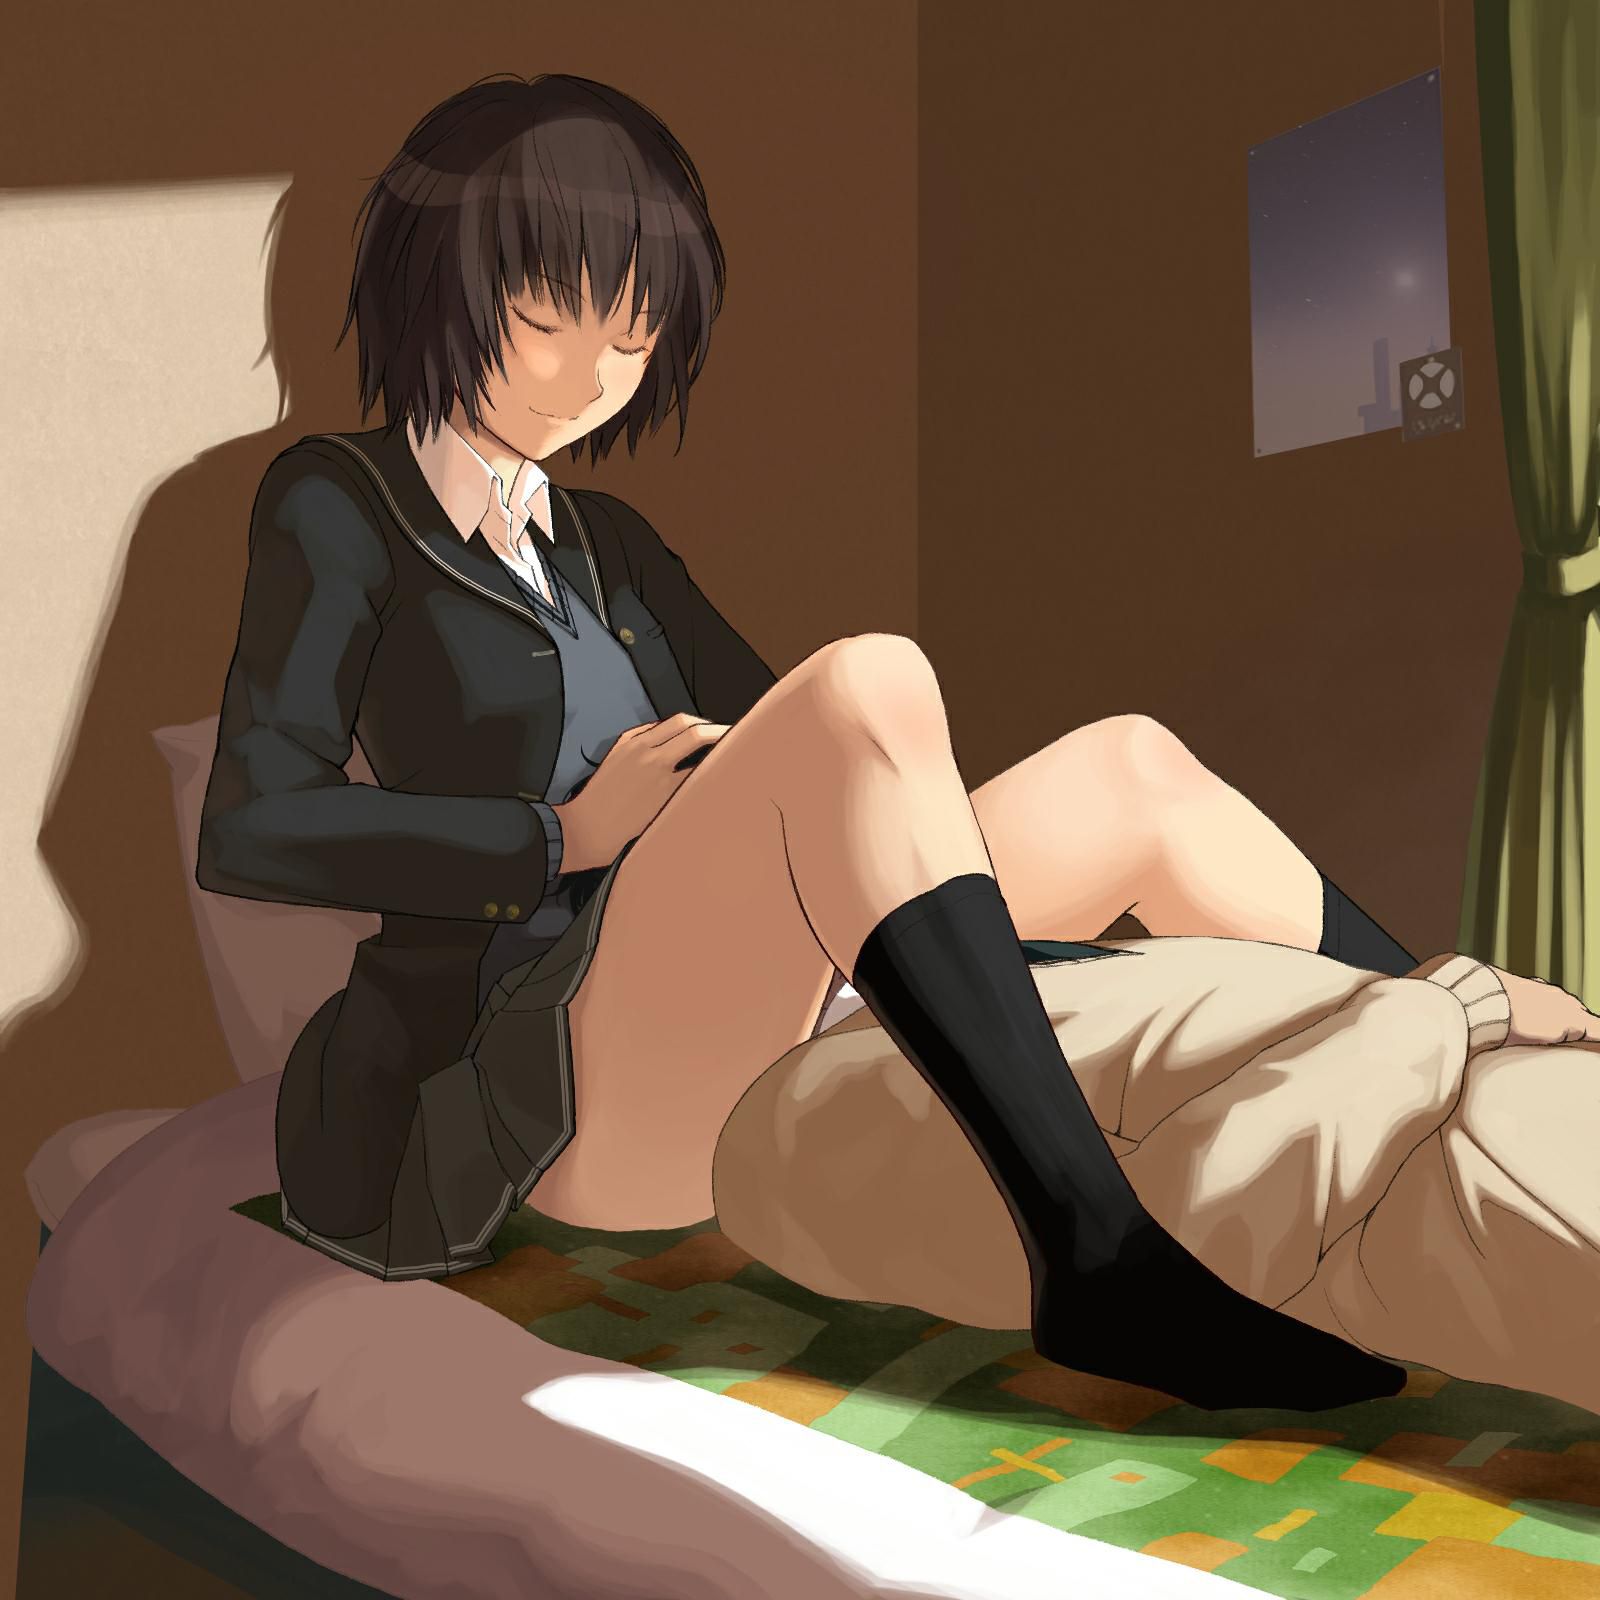 2 put up so you get full amagami hentai images for the time being 12